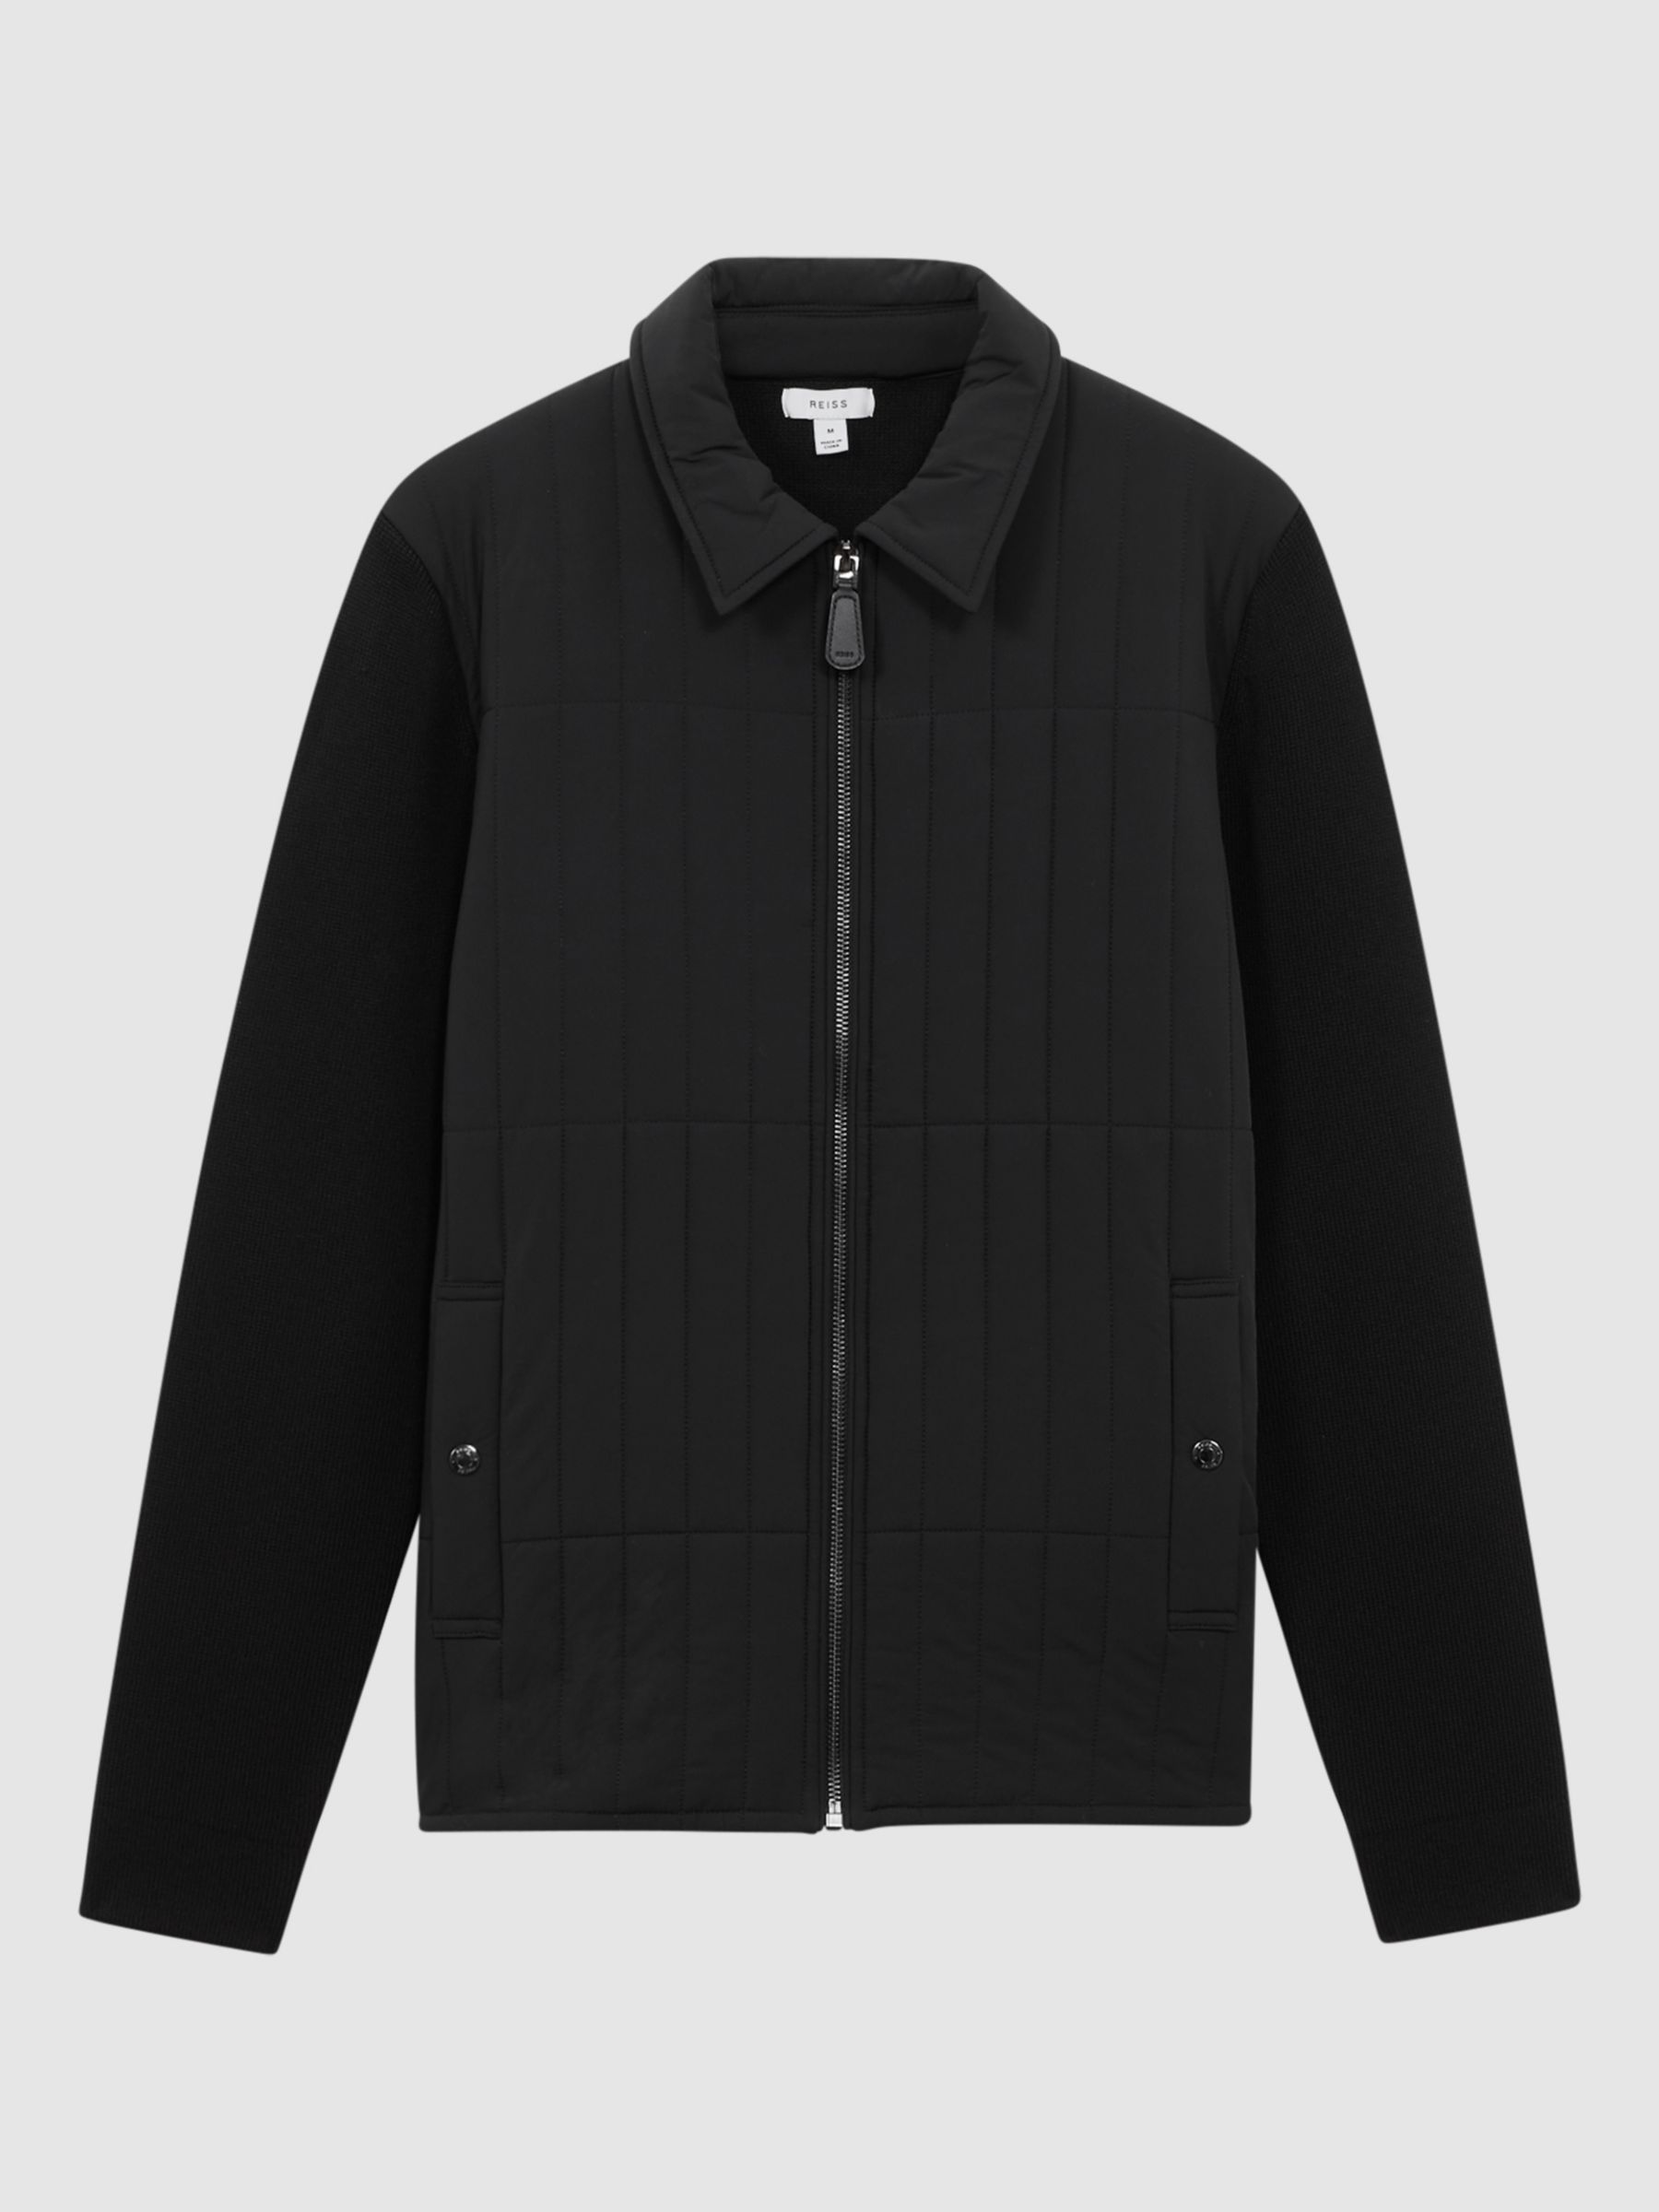 Reiss Tosca Long Sleeve Through Quilted Jacket, Black at John Lewis ...